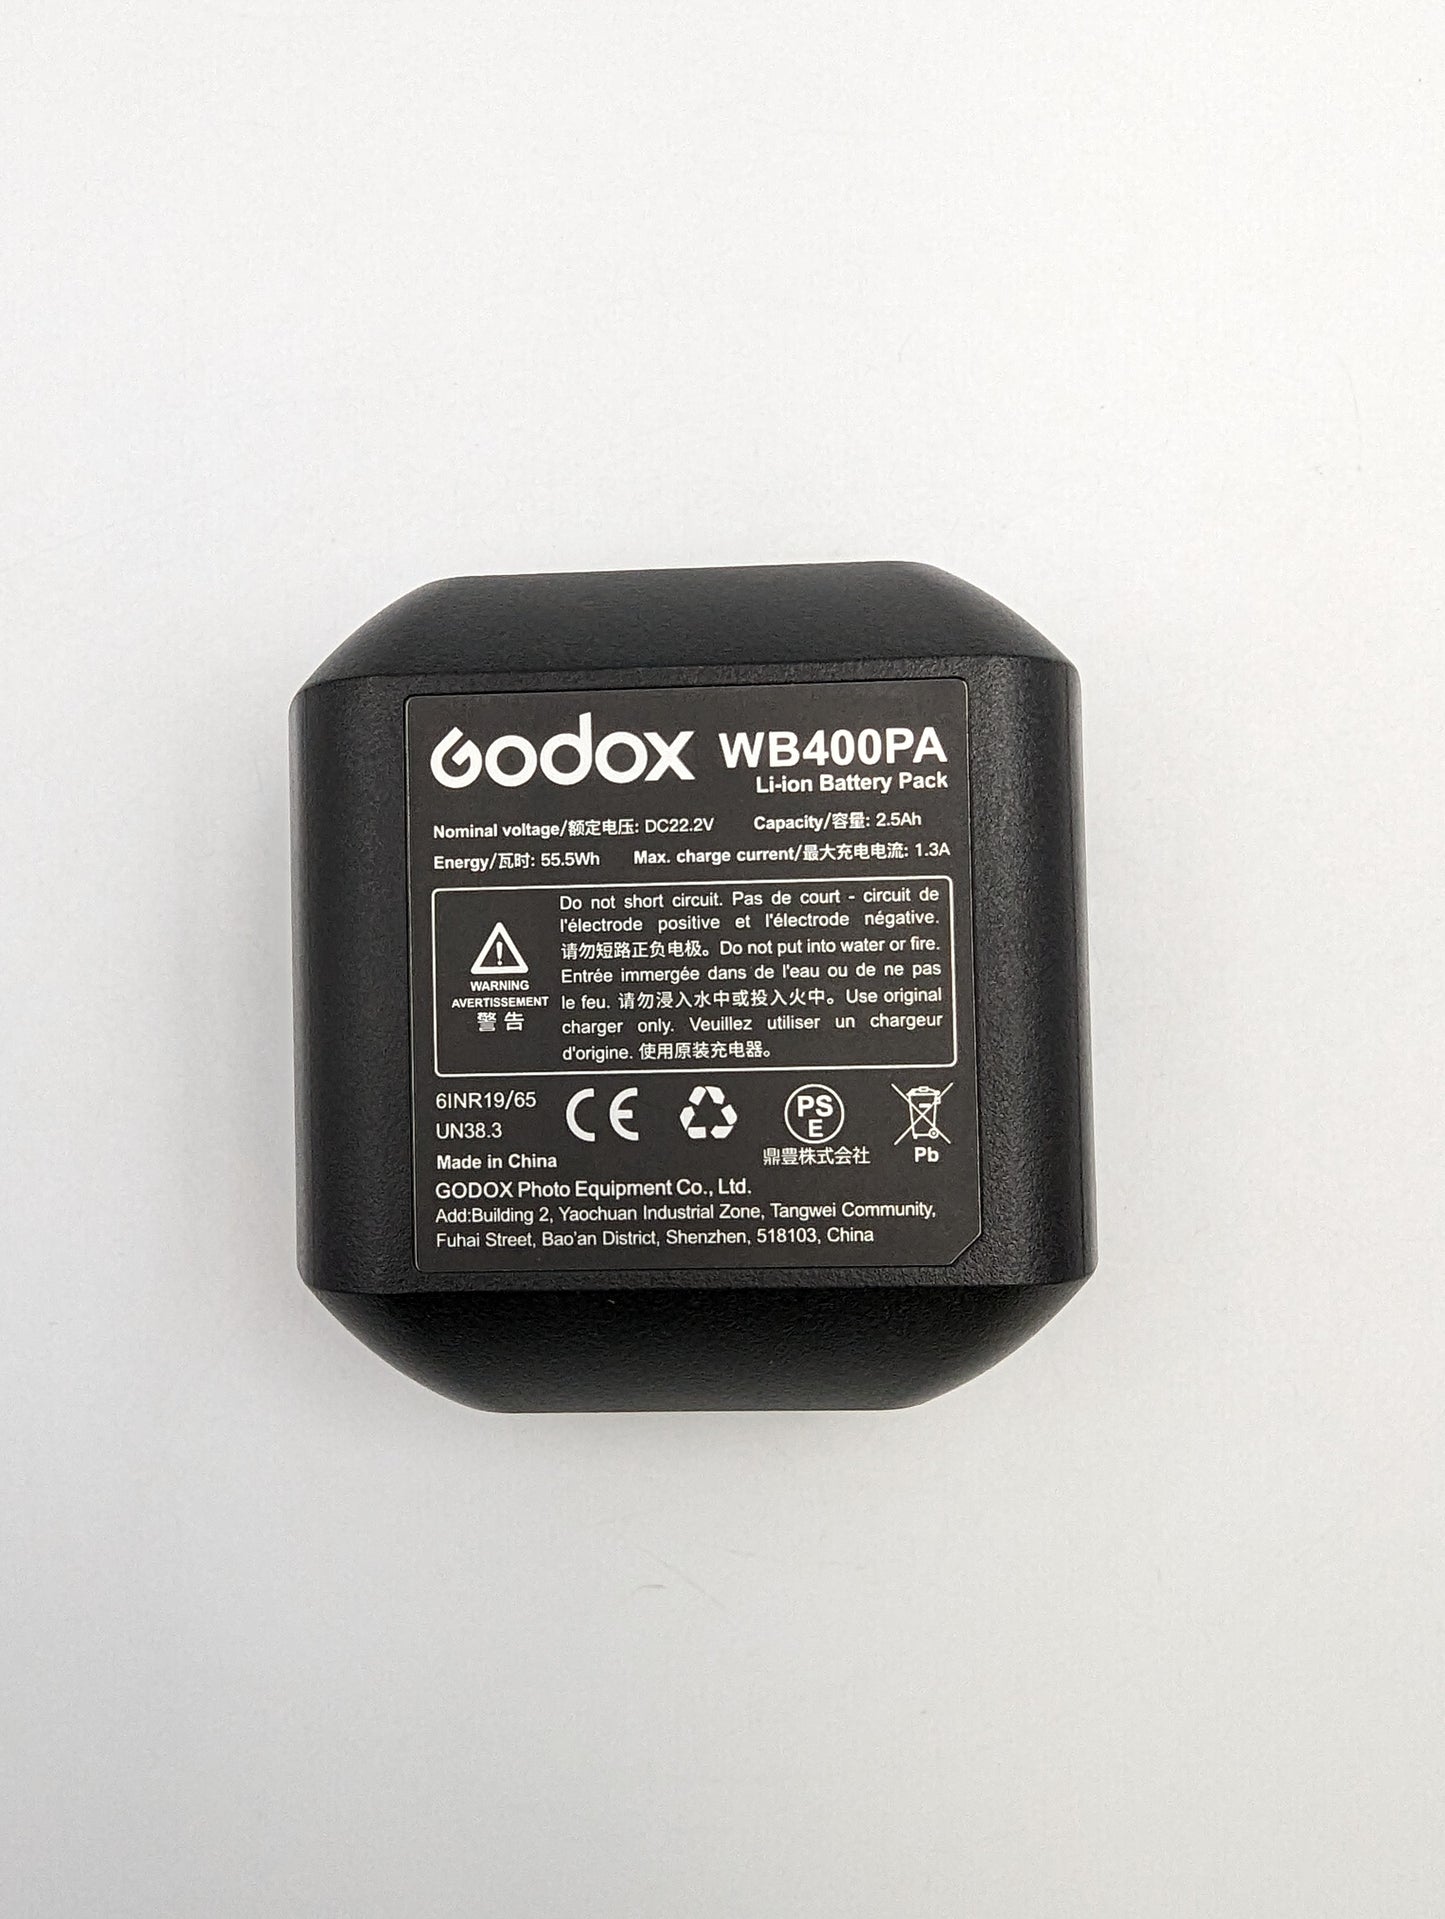 Godox WB400PA Battery.  Cheetahstand can "Reboot" these batteries.